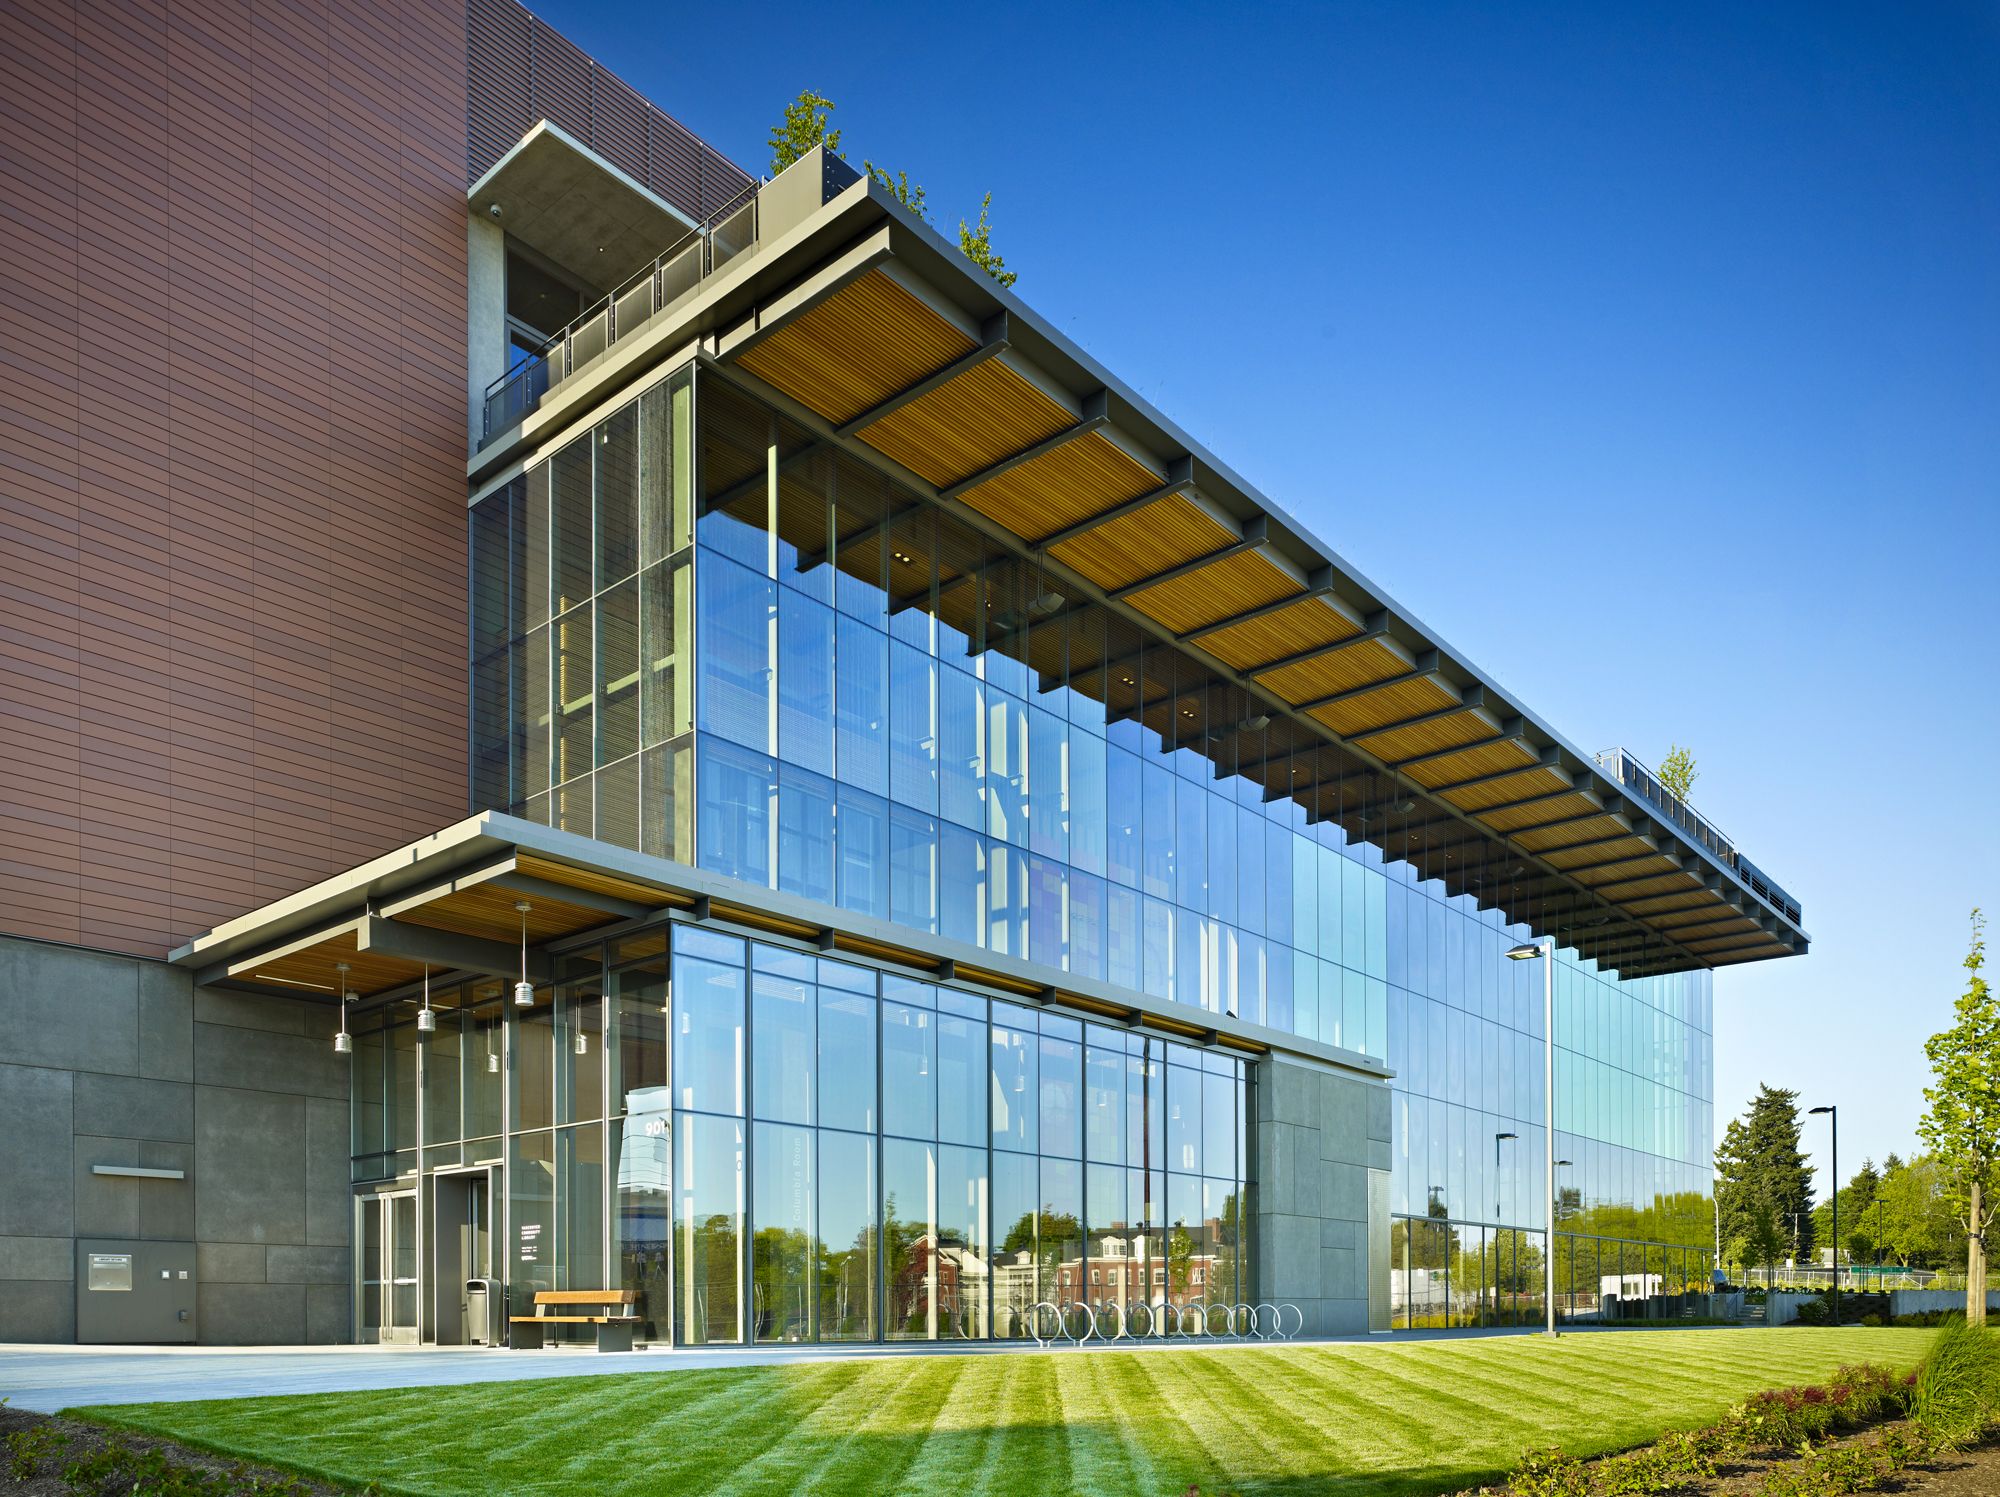 Exterior of the new Vancouver Community Library.